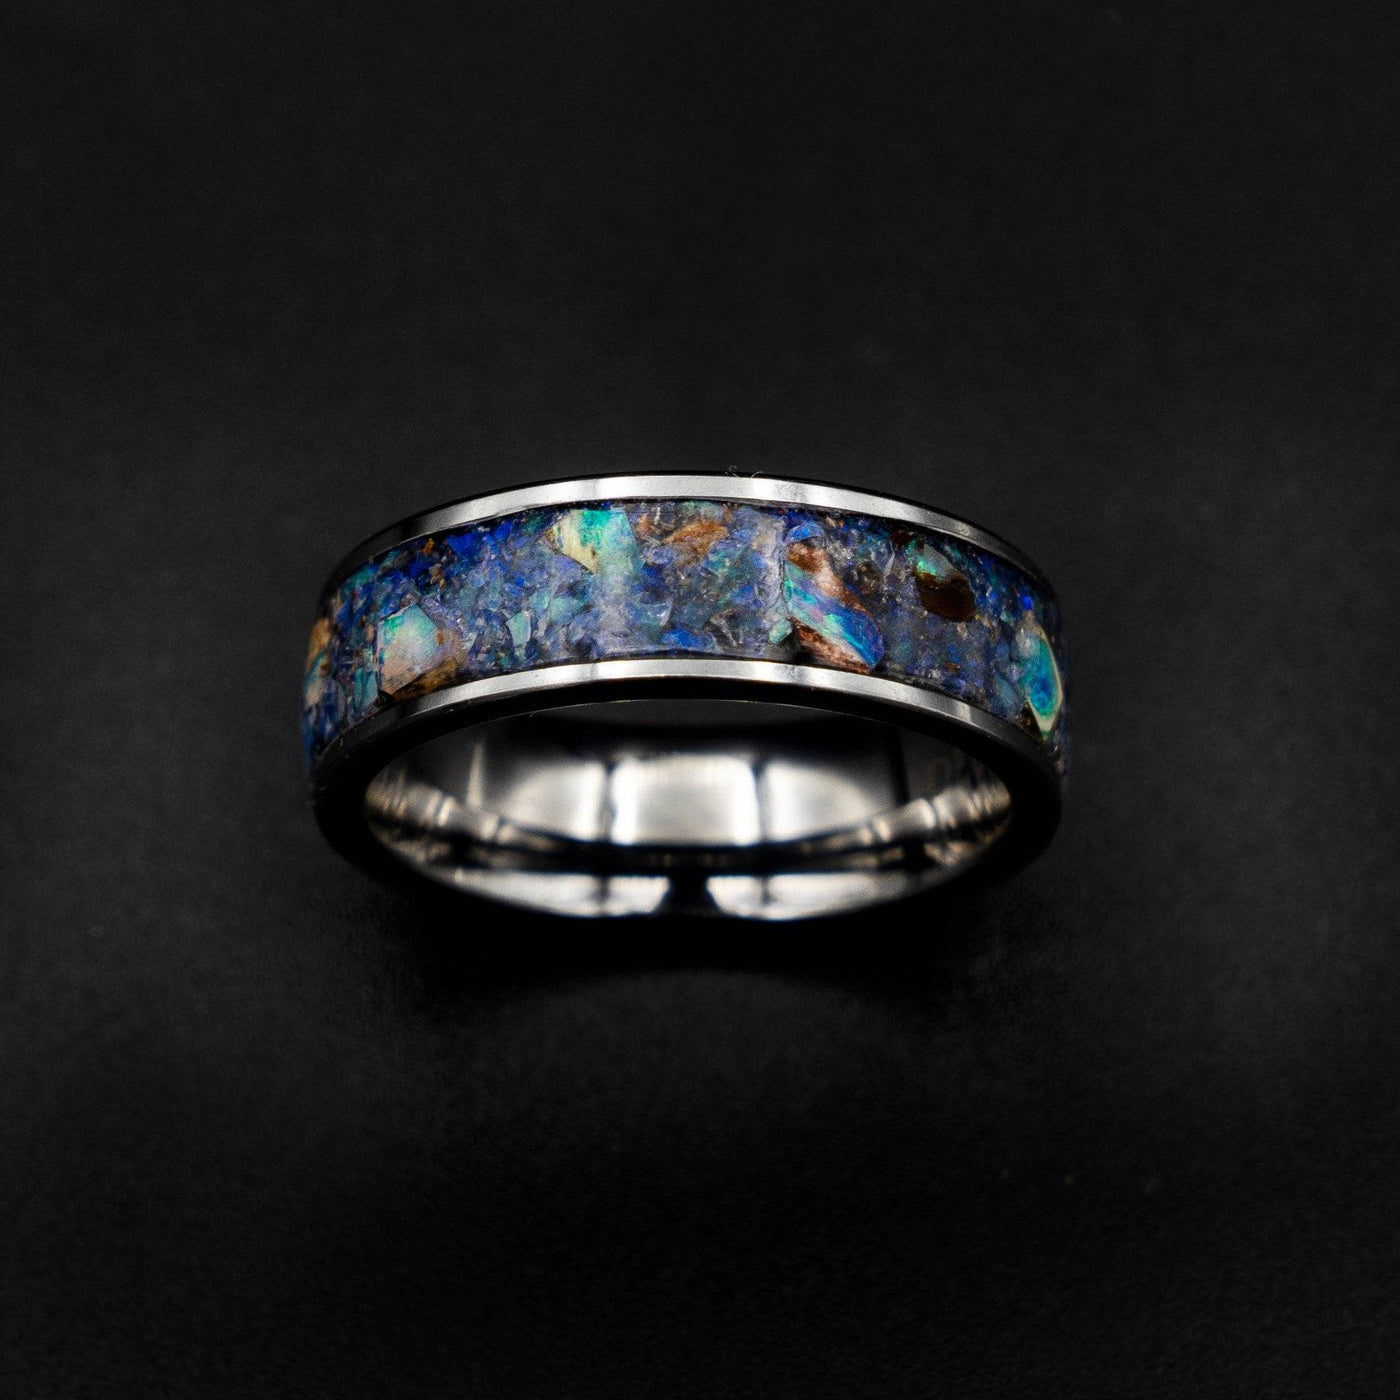 Zircon and Opal Fashion Ring | Fashion rings, Silver chloride, Opal rings